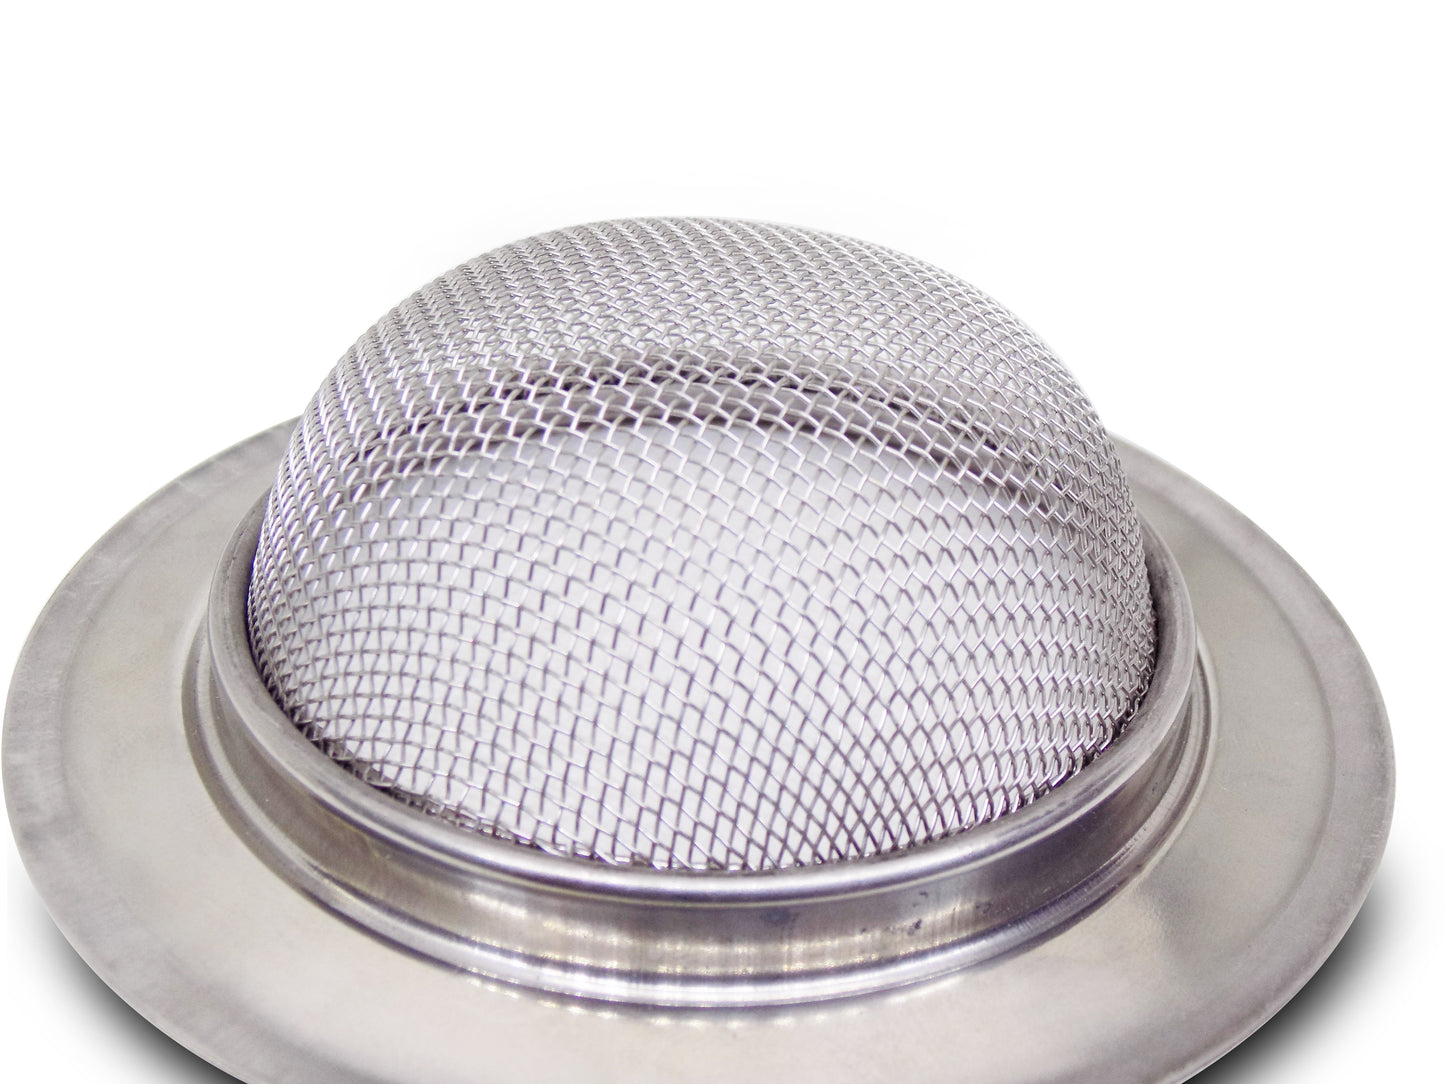 0792 Small Stainless Steel Sink/Wash Basin Drain Strainer DeoDap